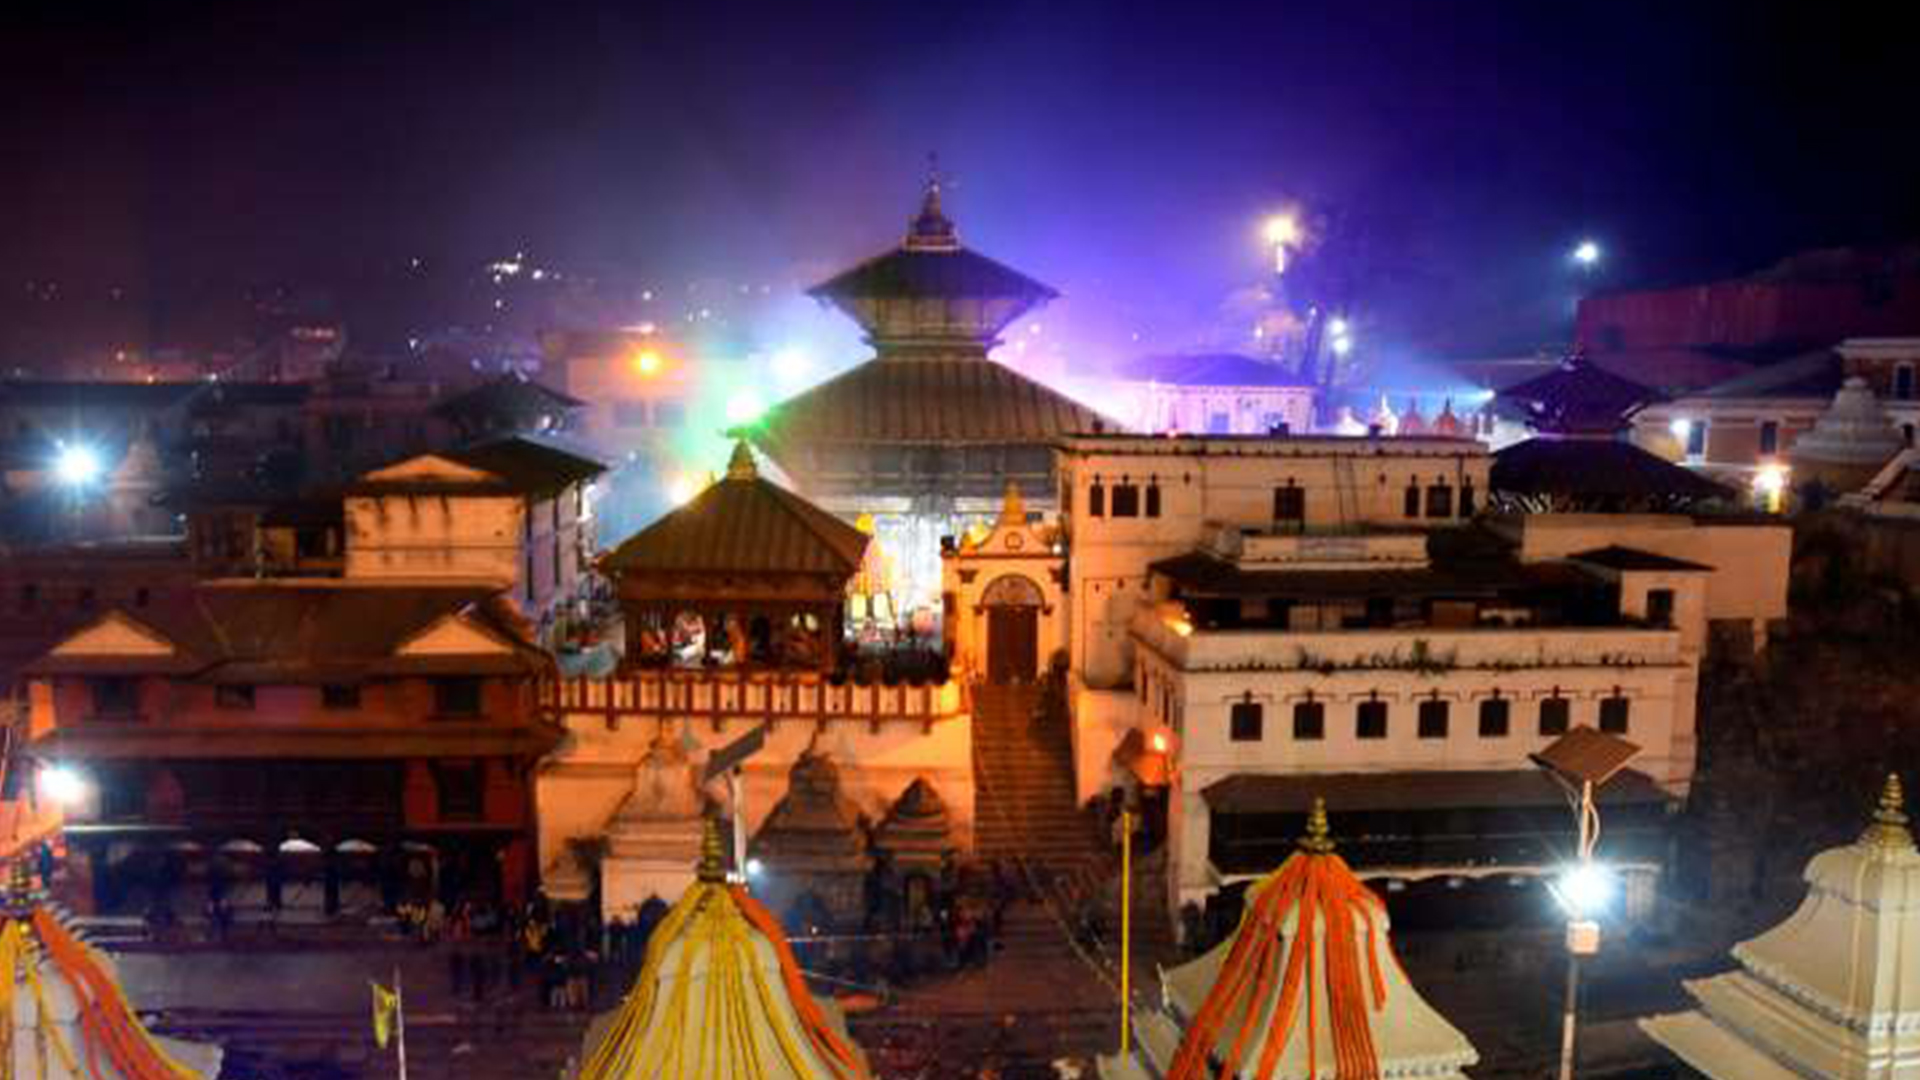 Pashupatinath opening for devotees from 1 Poush (January 16)